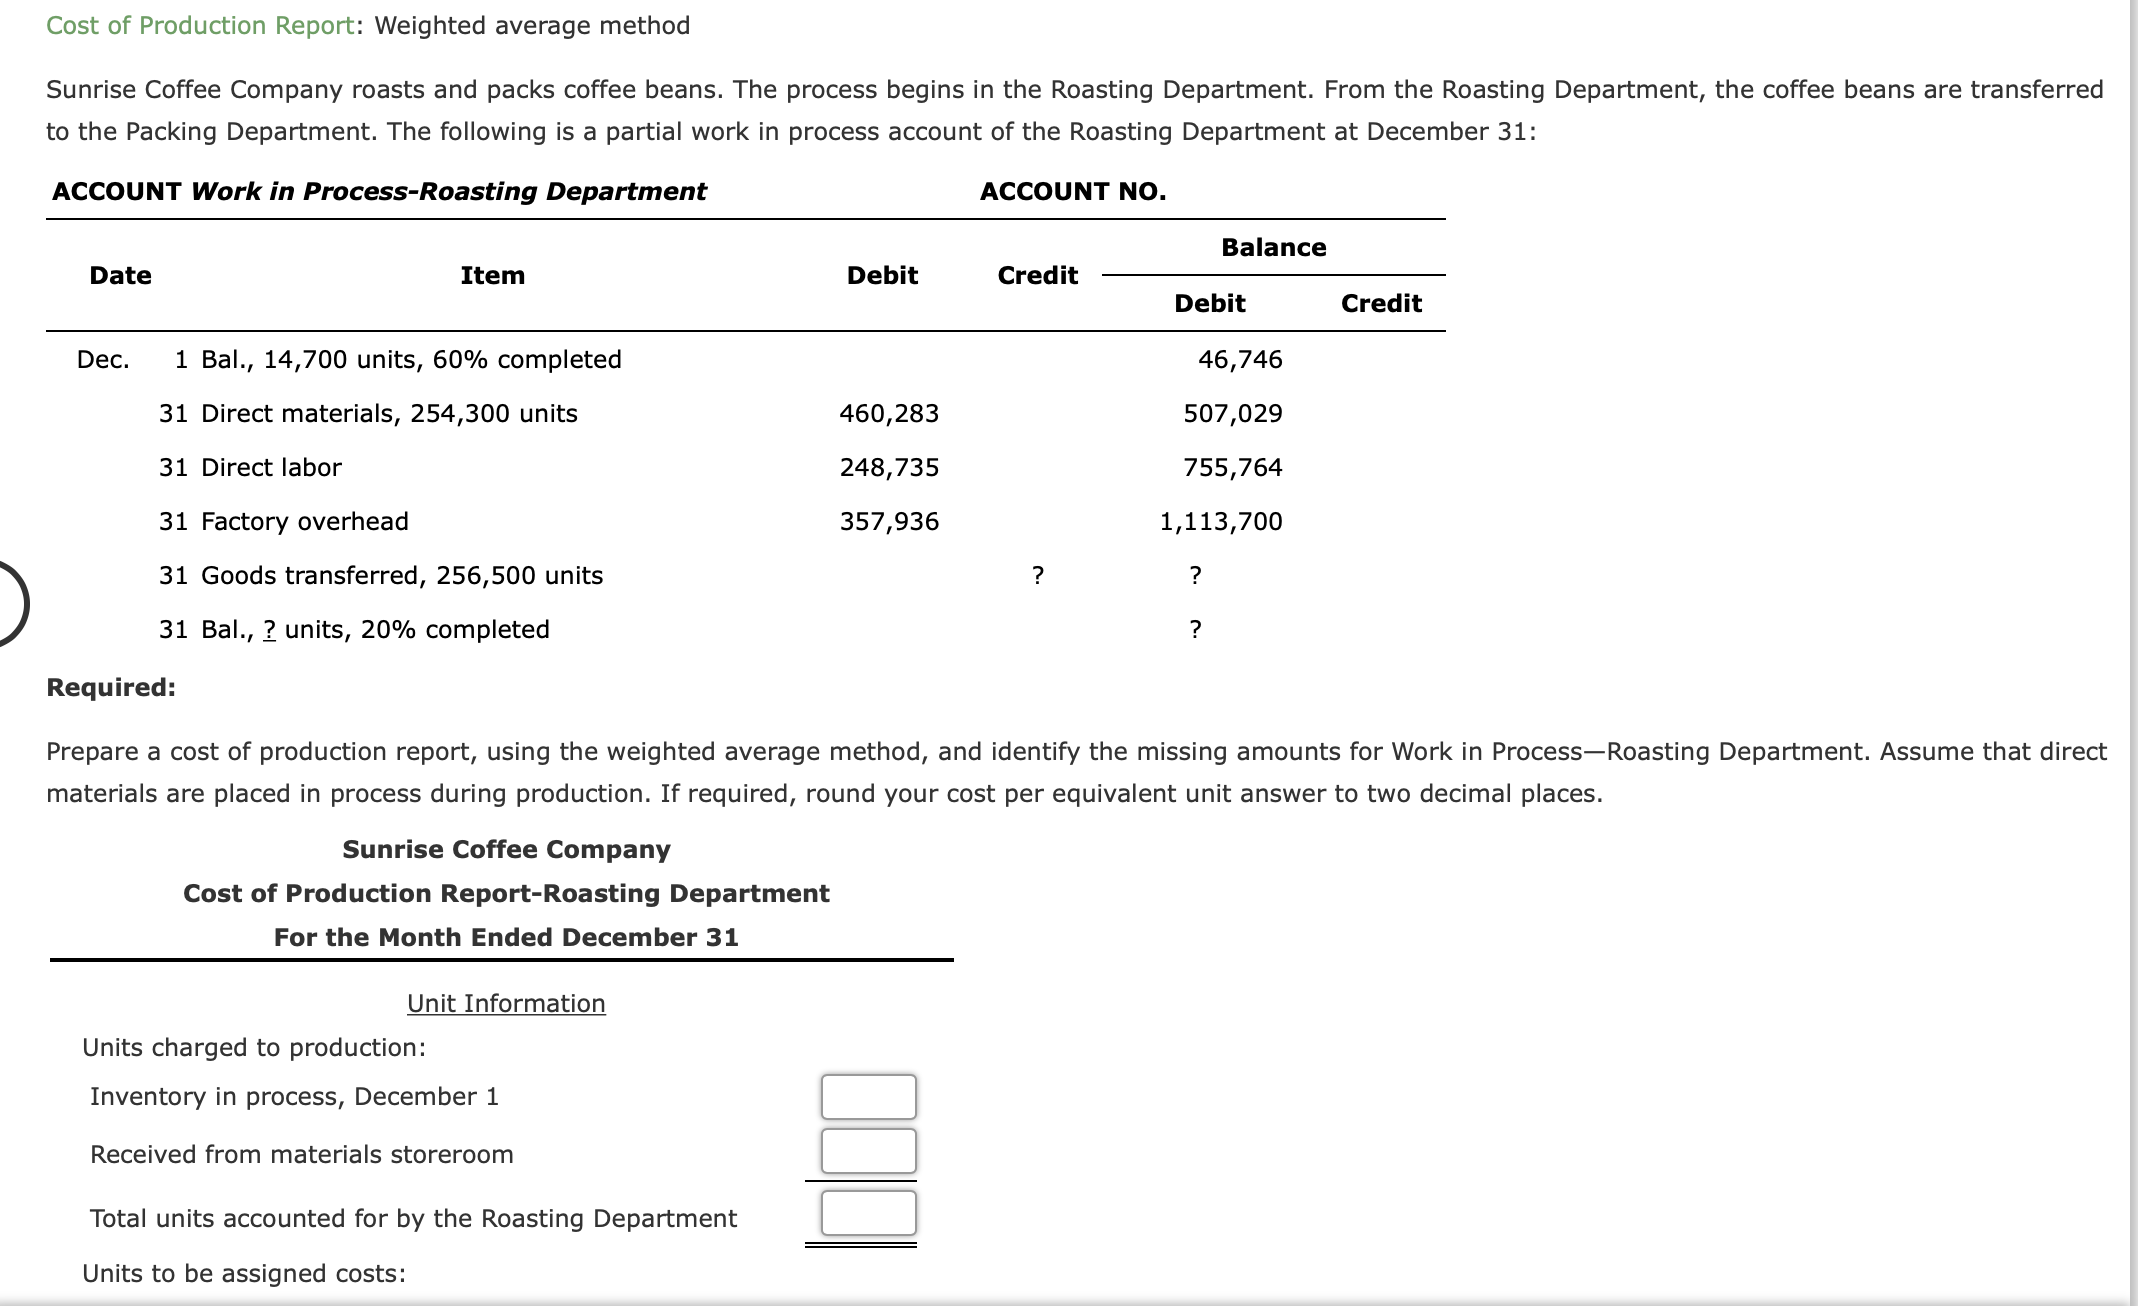 Prepare a cost of production report, using the weighted average method, and identify the missing amounts for Work in Process-Roasting Department. Assume that direct
materials are placed in process during production. If required, round your cost per equivalent unit answer to two decimal places.
Sunries
